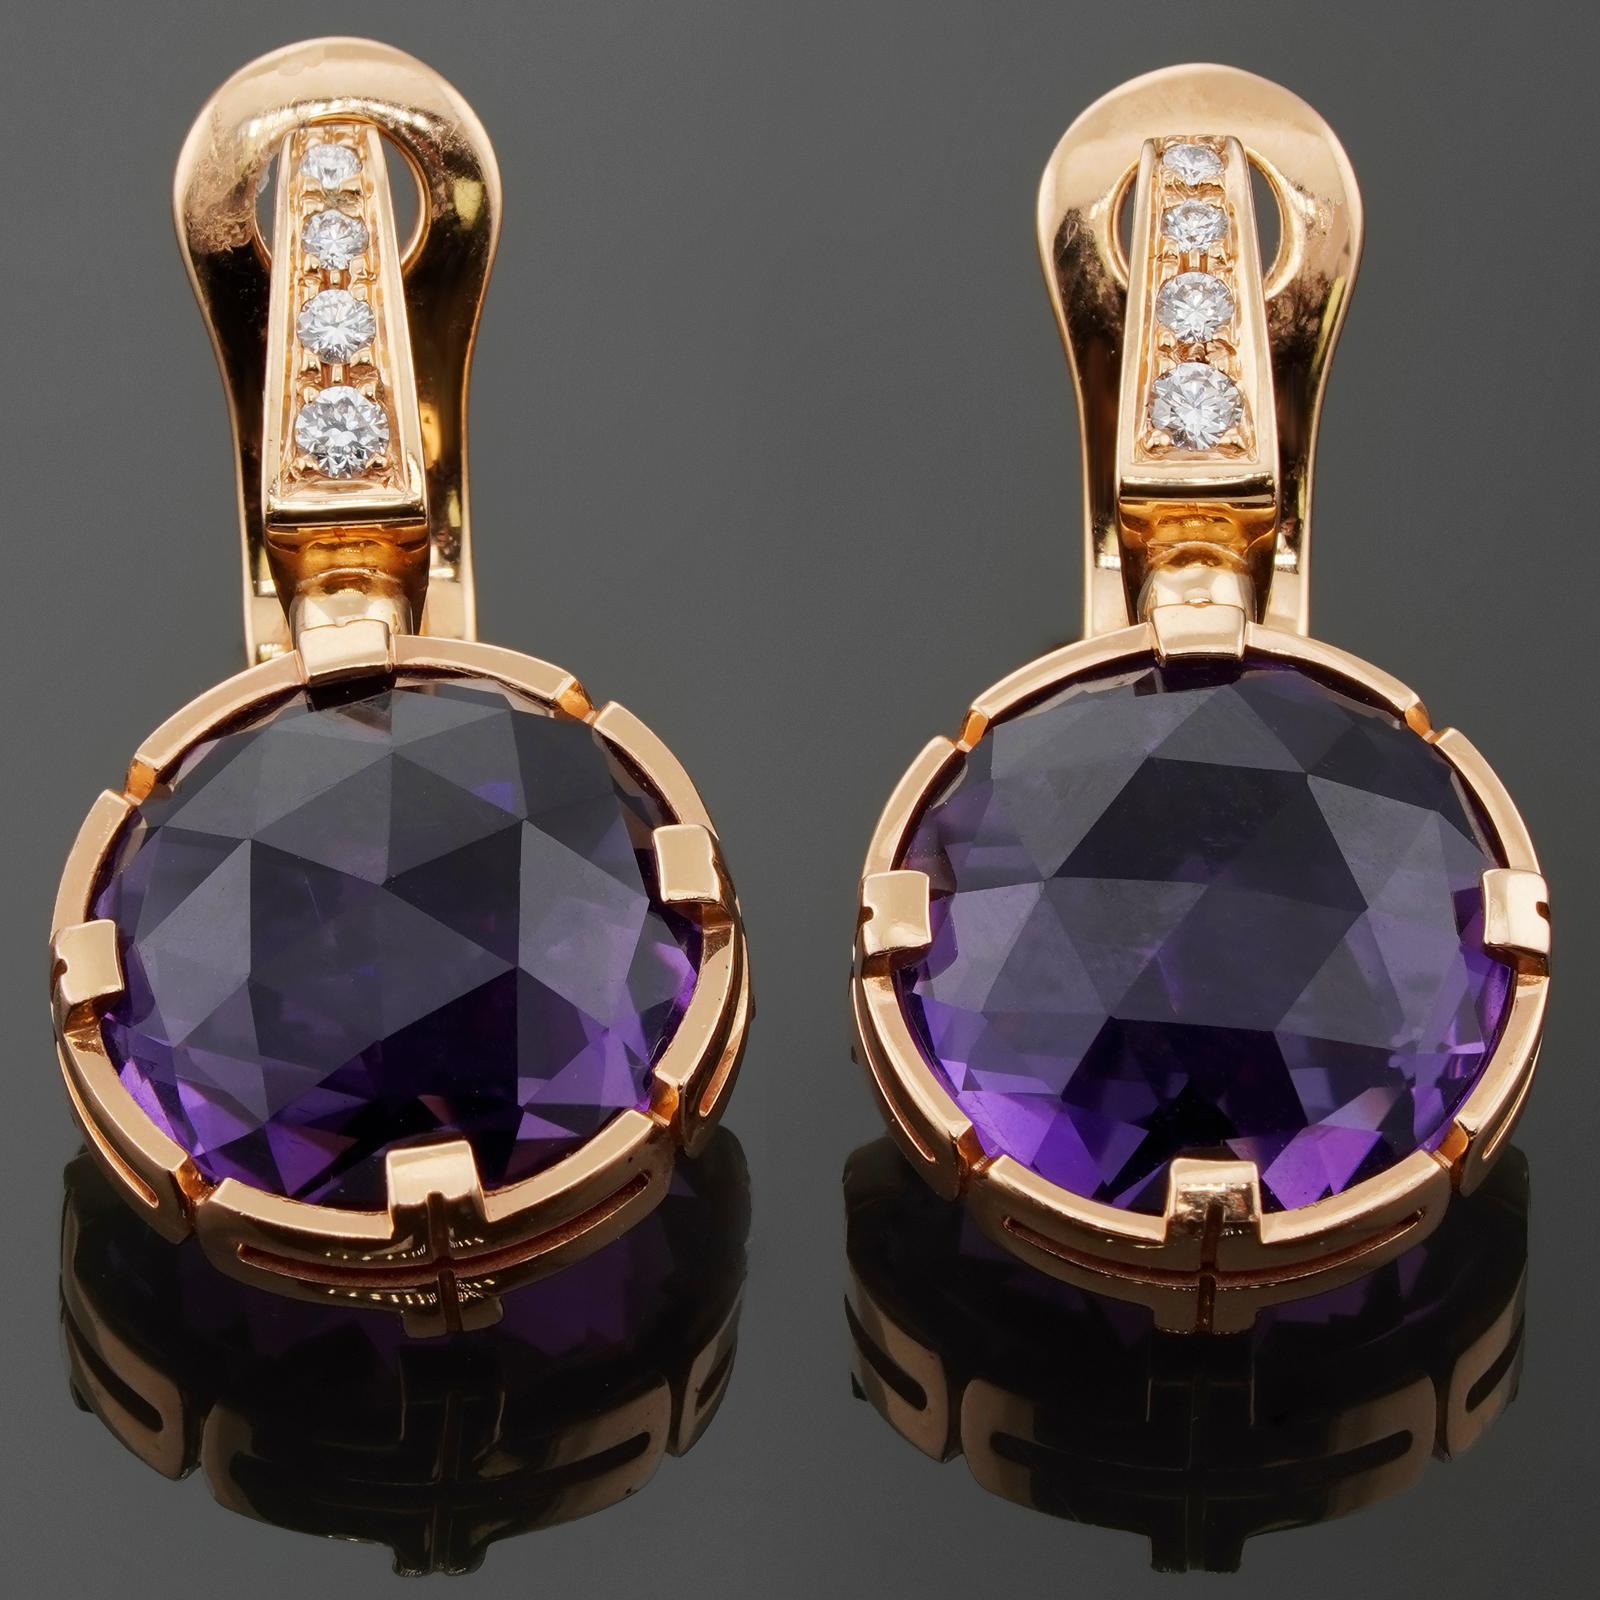 These vibrant clip-on earrings from Bulgari's Parentesi collection are crafted in 18k rose gold, set with brilliant-cut round E-F-G VVS1-VVS2 diamonds and completed with faceted round amethyst drops. Made in Italy circa 2010s. Measurements: 0.59